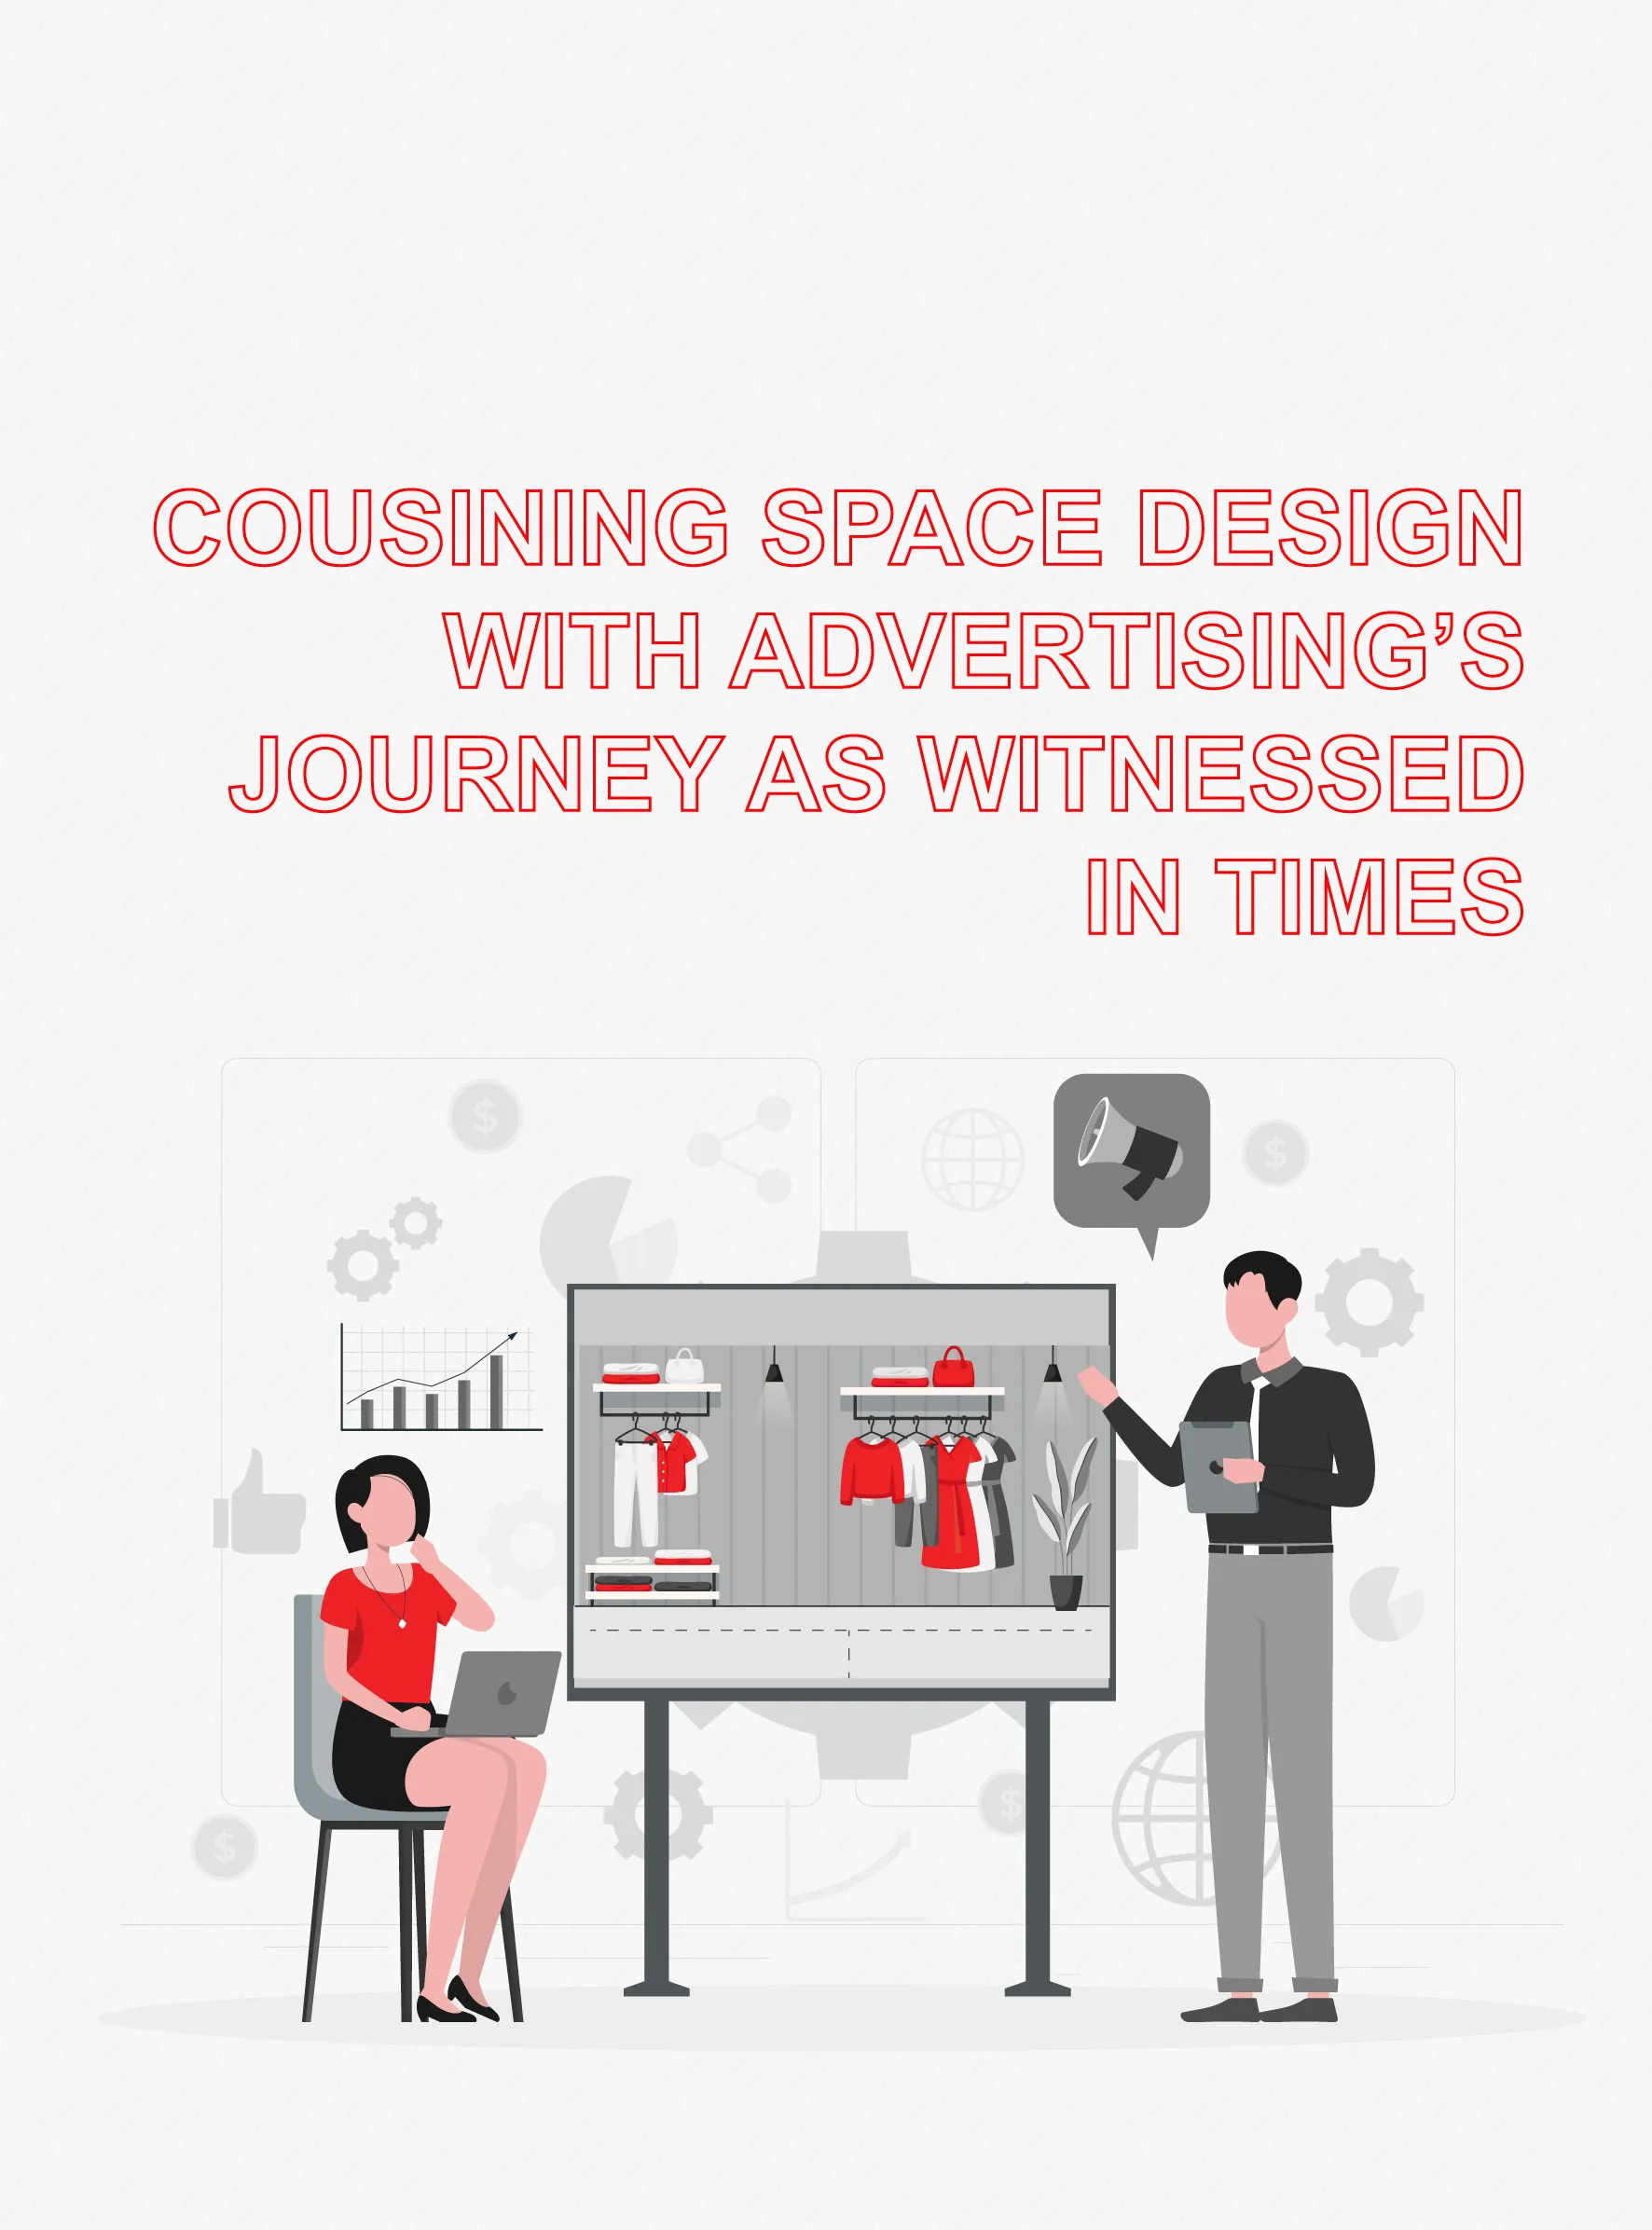 Cousining space design with advertising's journey as witnessed in times